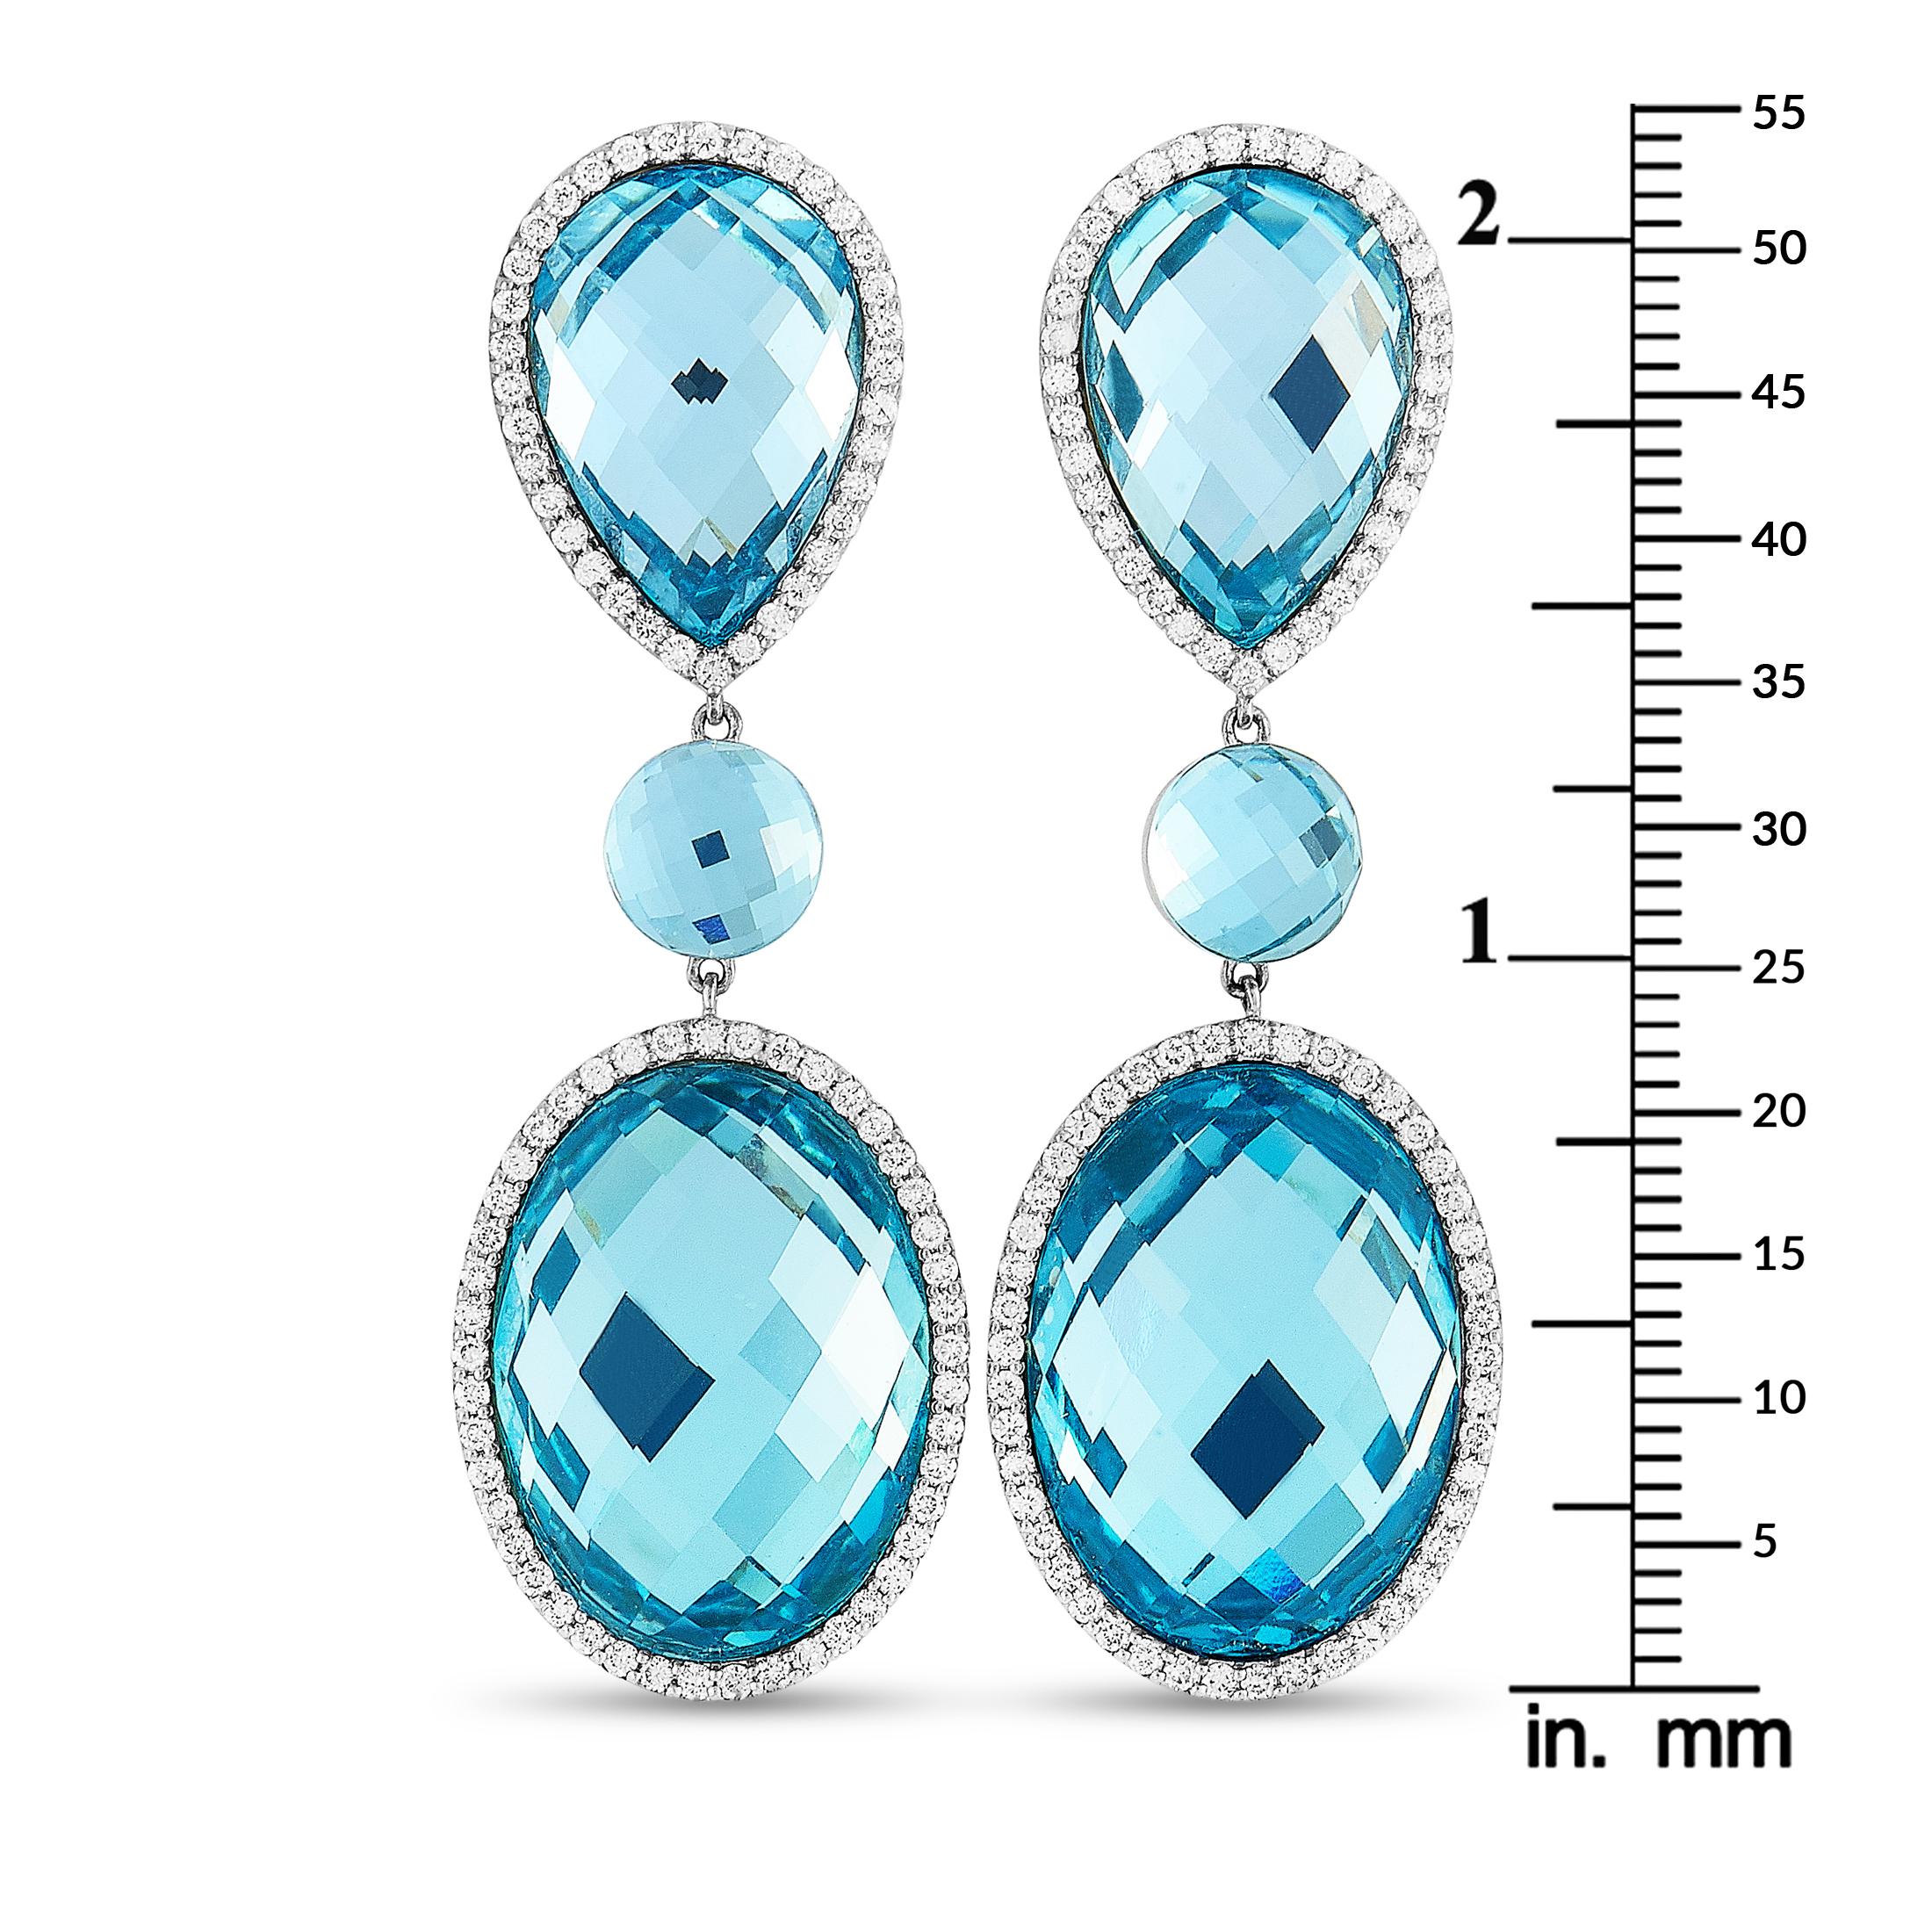 These Roberto Coin earrings are made of 18K white gold and each weighs 12.25 grams, measuring 2.20” in length and 0.75” in width. The earrings are set with diamonds and topazes that total 1.32 and 30.00 carats respectively.

Offered in brand new